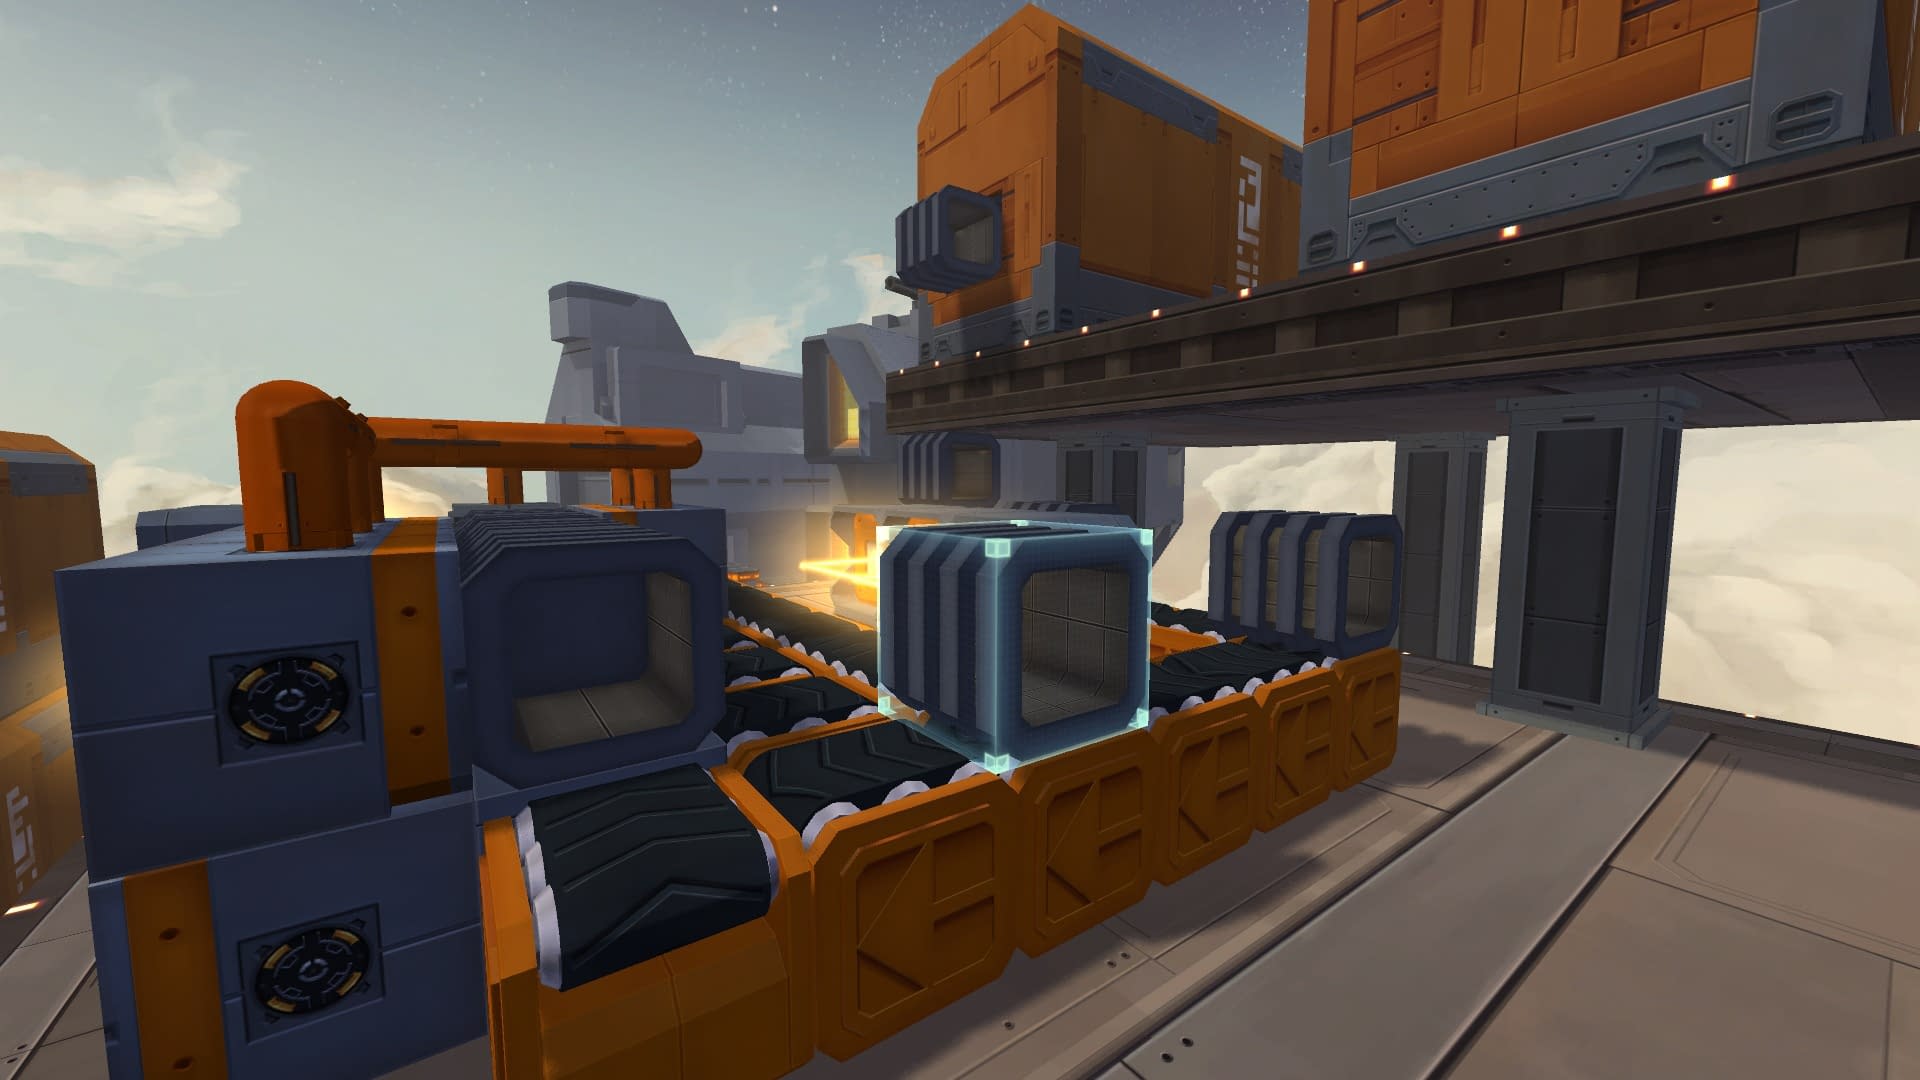 Remember to Get Infinifactory Game from Epic Games